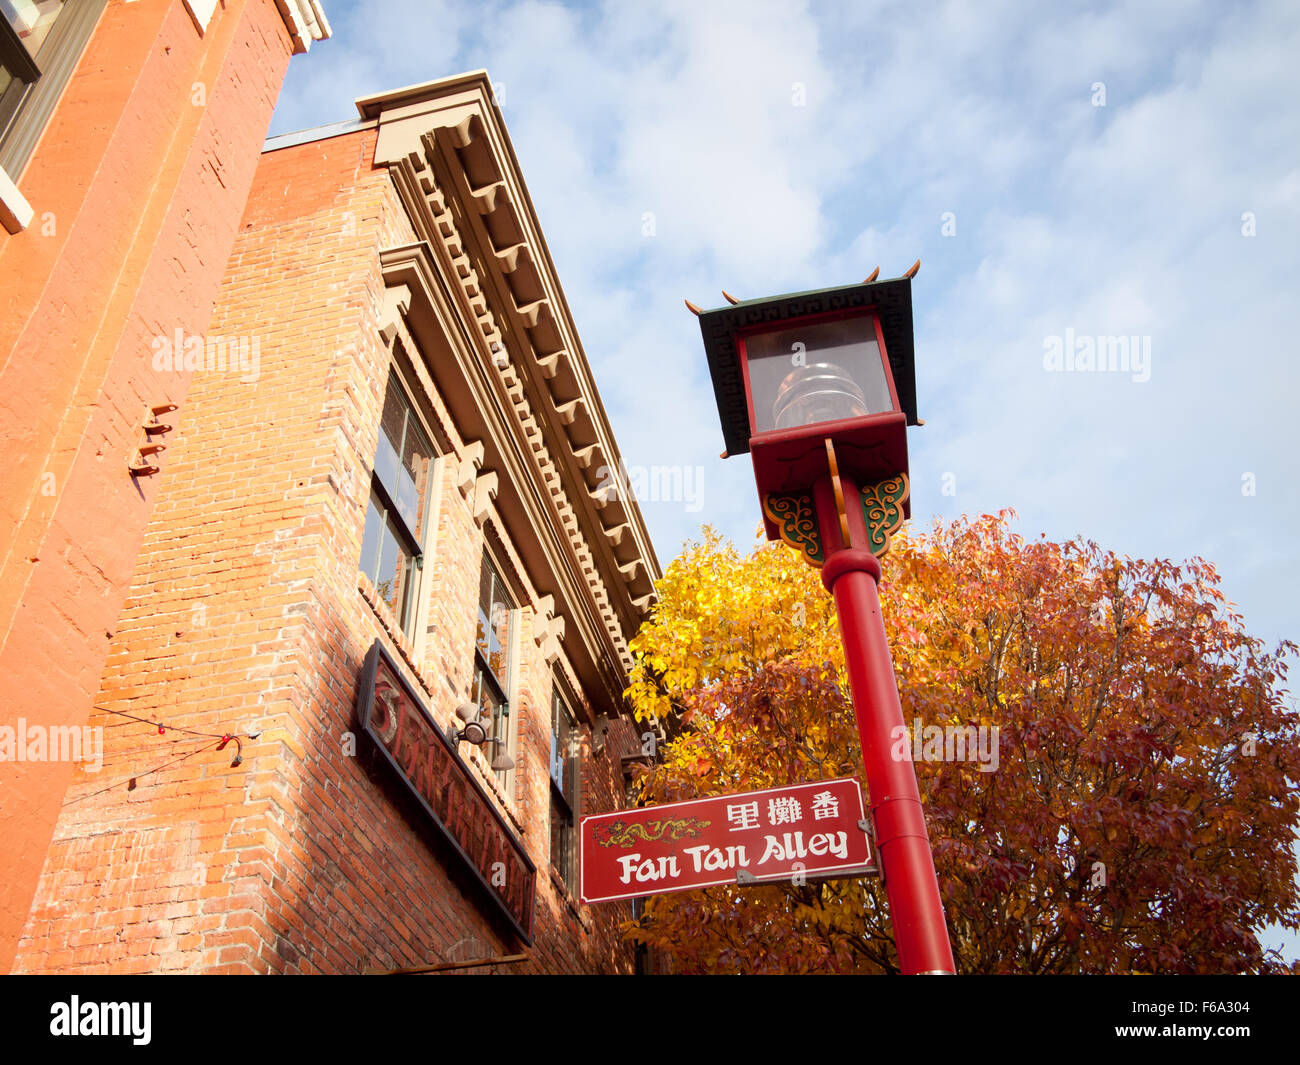 A street sign for Fan Tan Alley in Chinatown, Victoria, British Columbia, Canada. Stock Photo